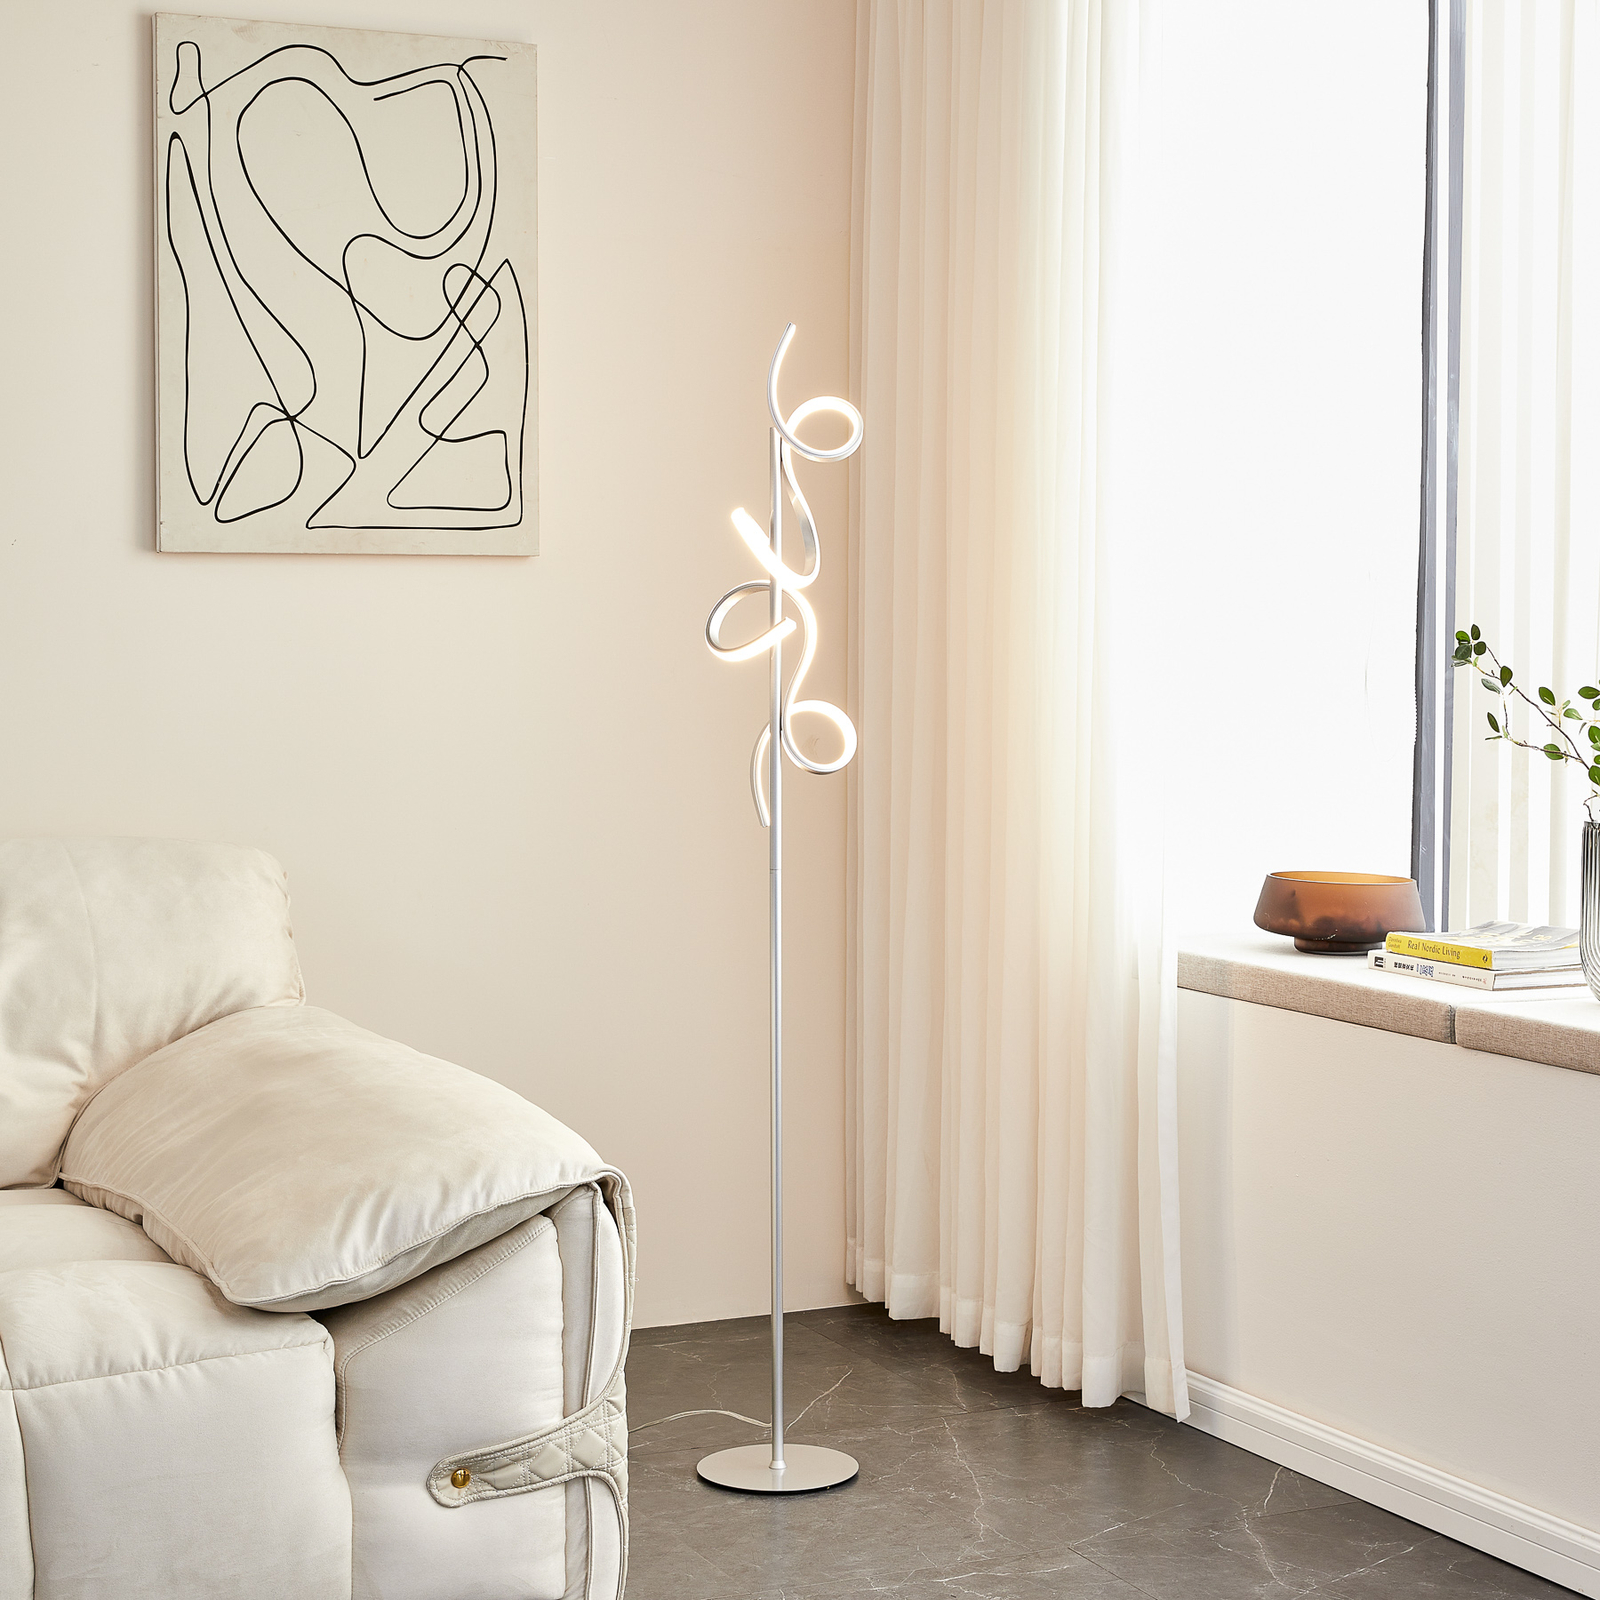 Lindby Zaylee LED floor lamp with dimmer, silver